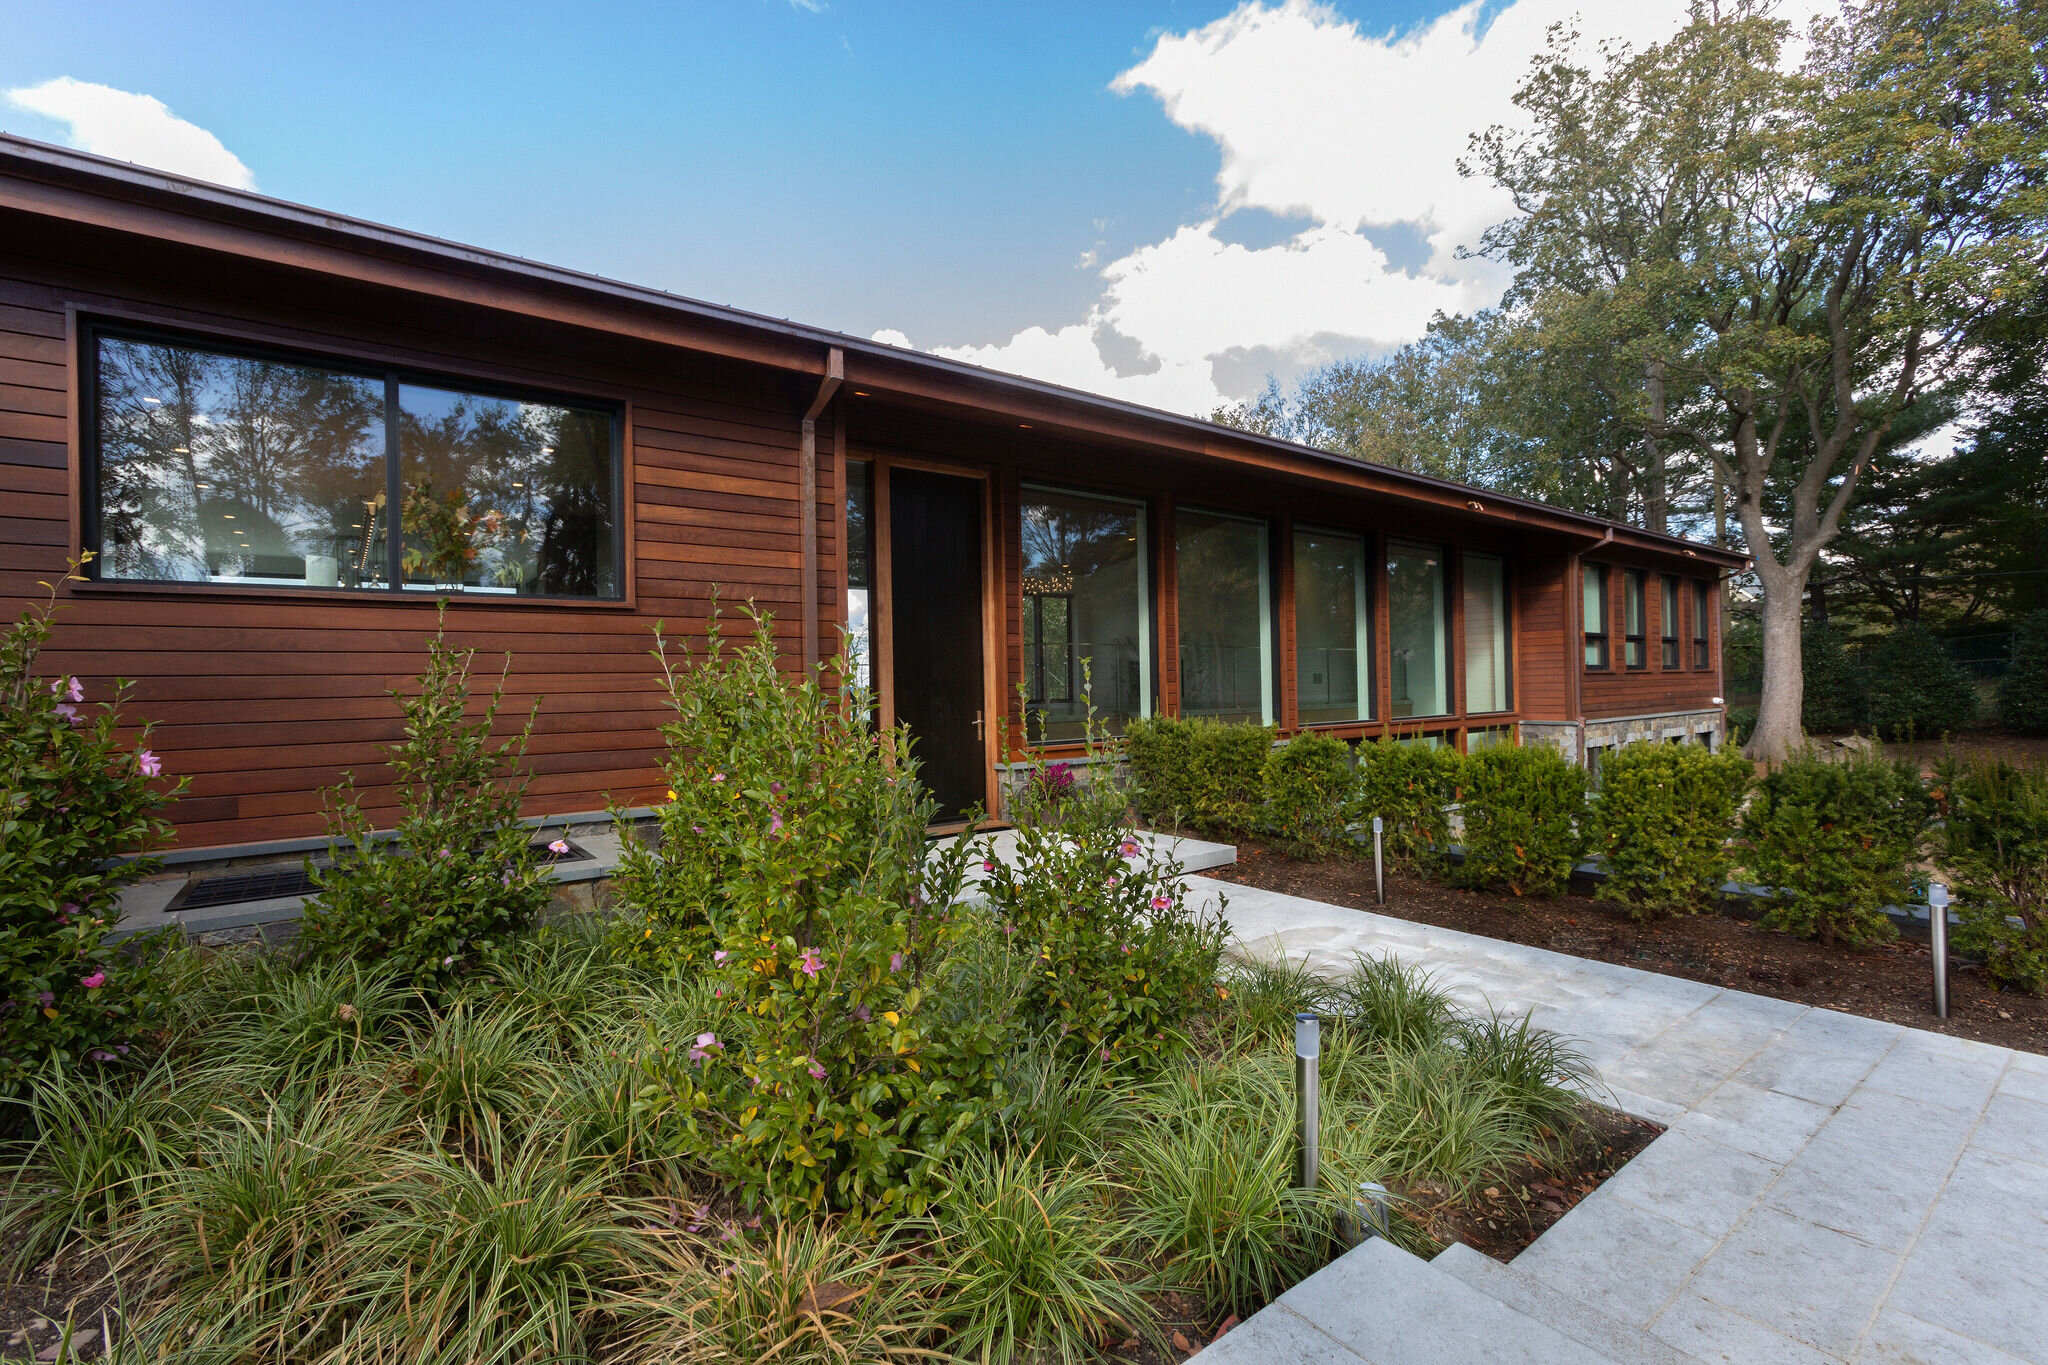  This house was designed with harmony and tranquility in mind incorporating the beautiful outdoors. 